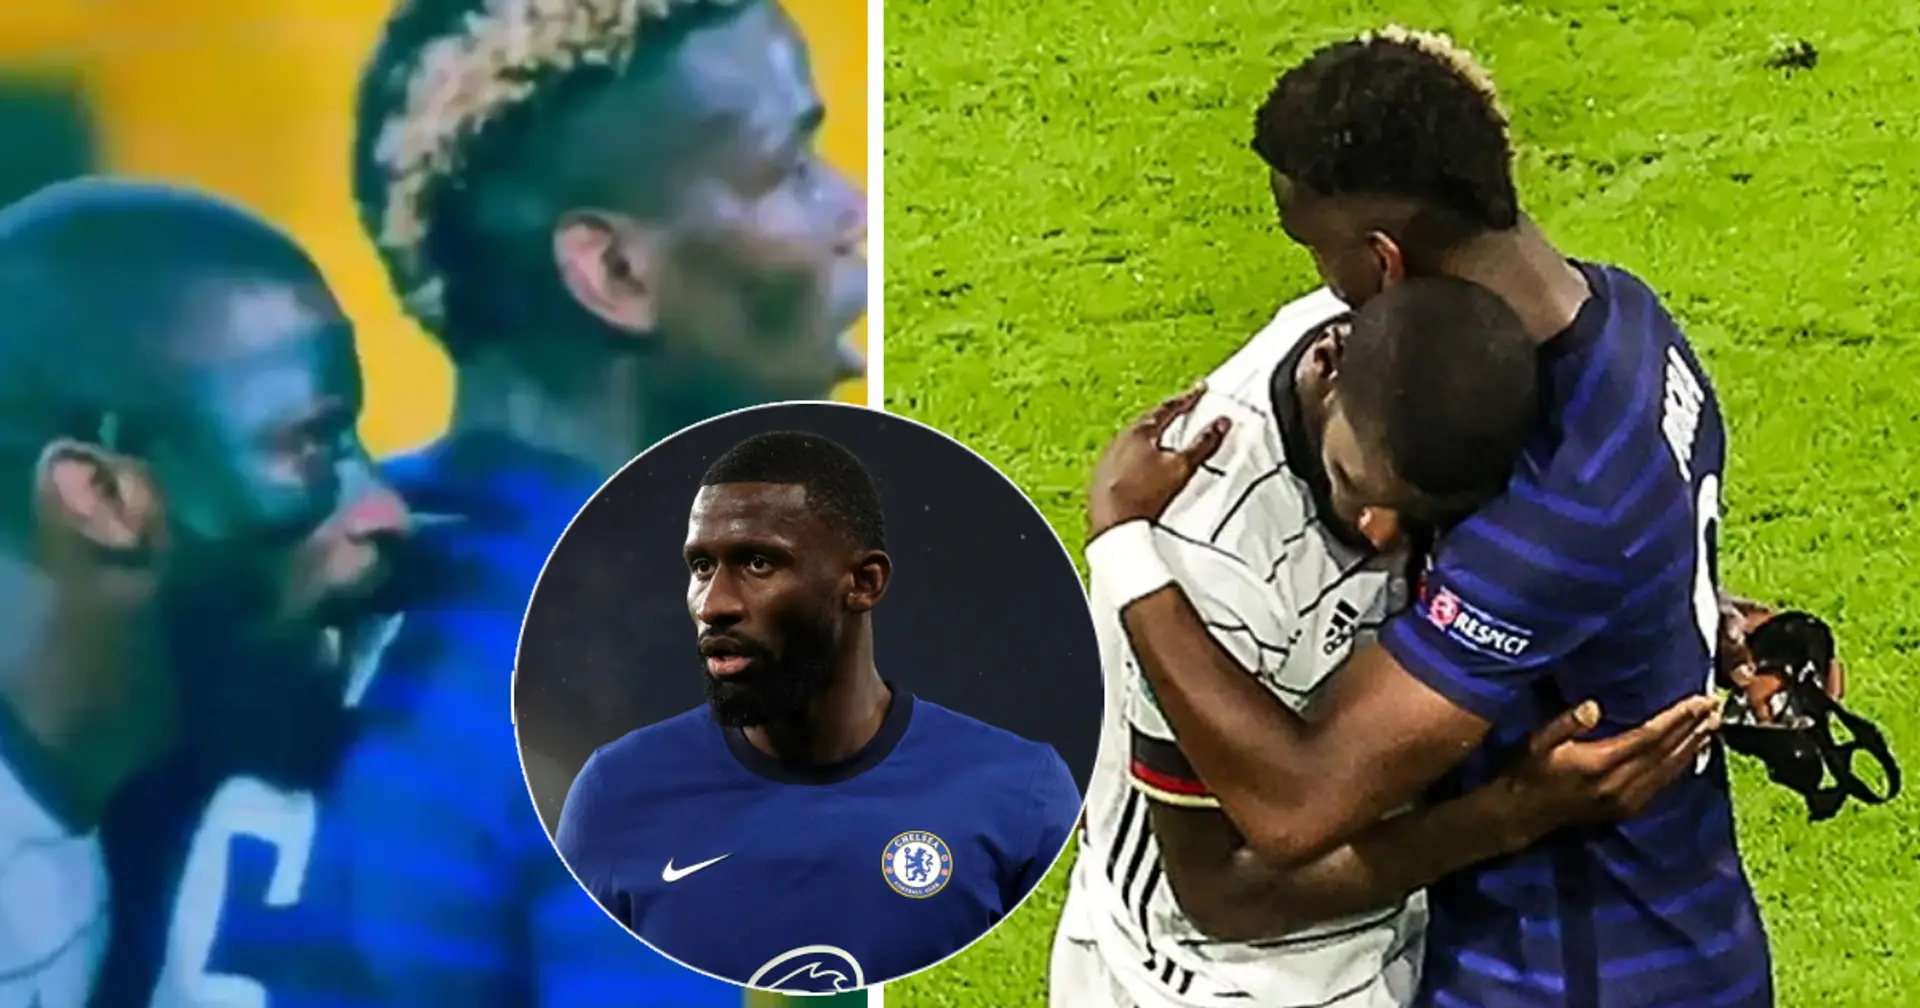 Rudiger and Pogba interact positively with each other after game despite 'biting' incident - spotted